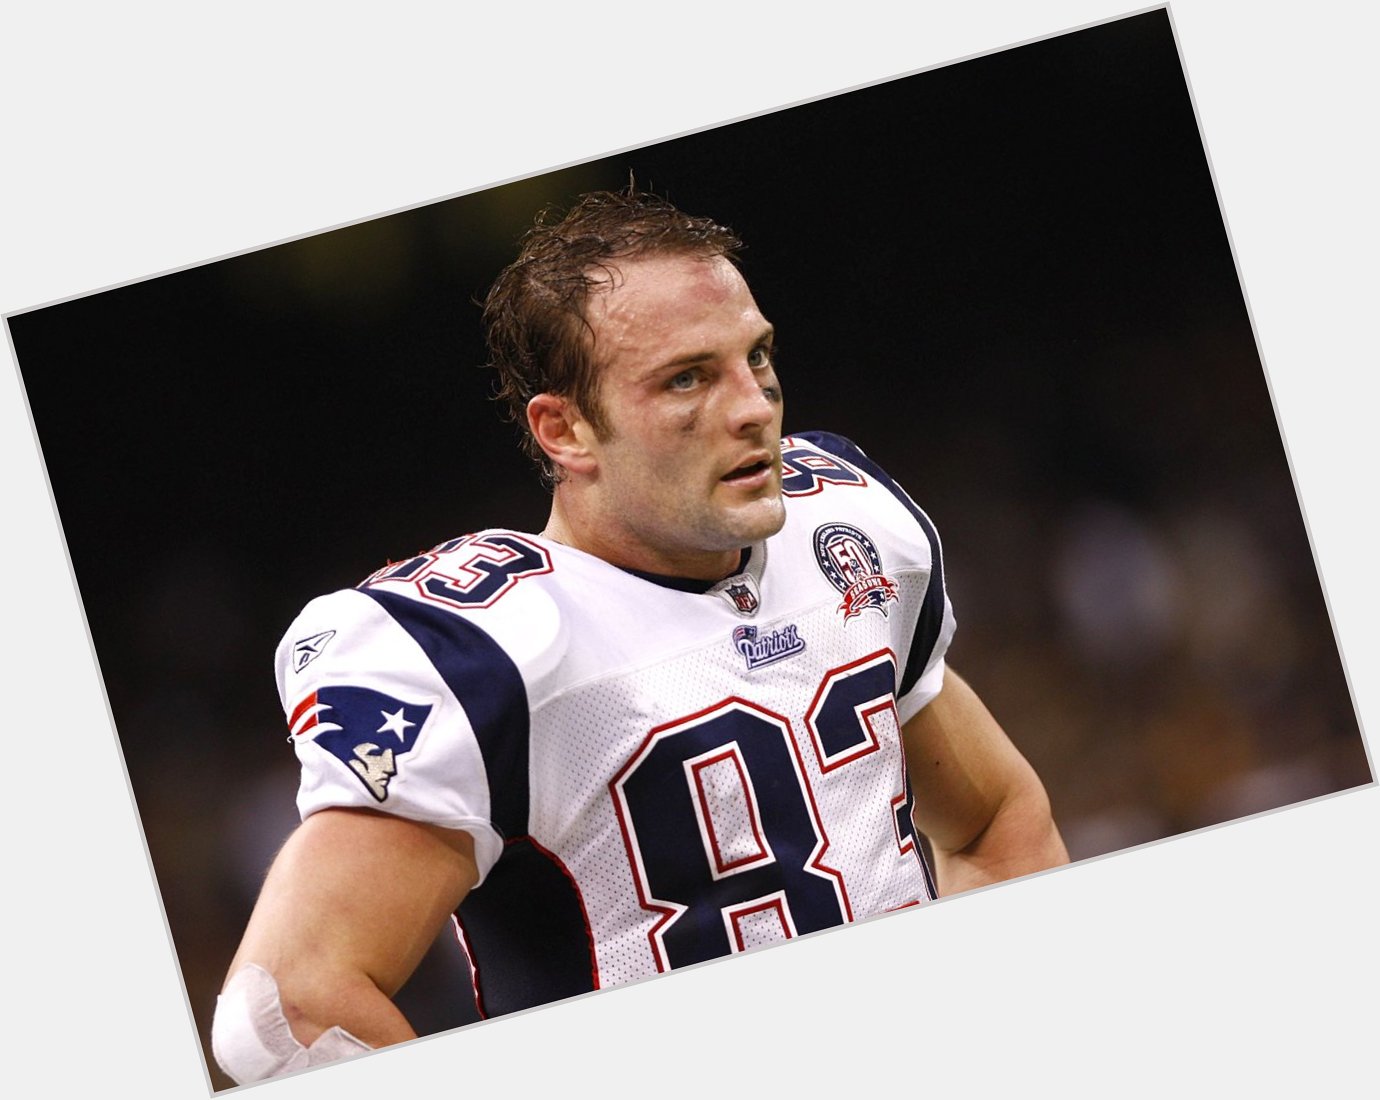 Happy Birthday to Wes Welker! 

Without looking it up, do you know where he played his College Football? 